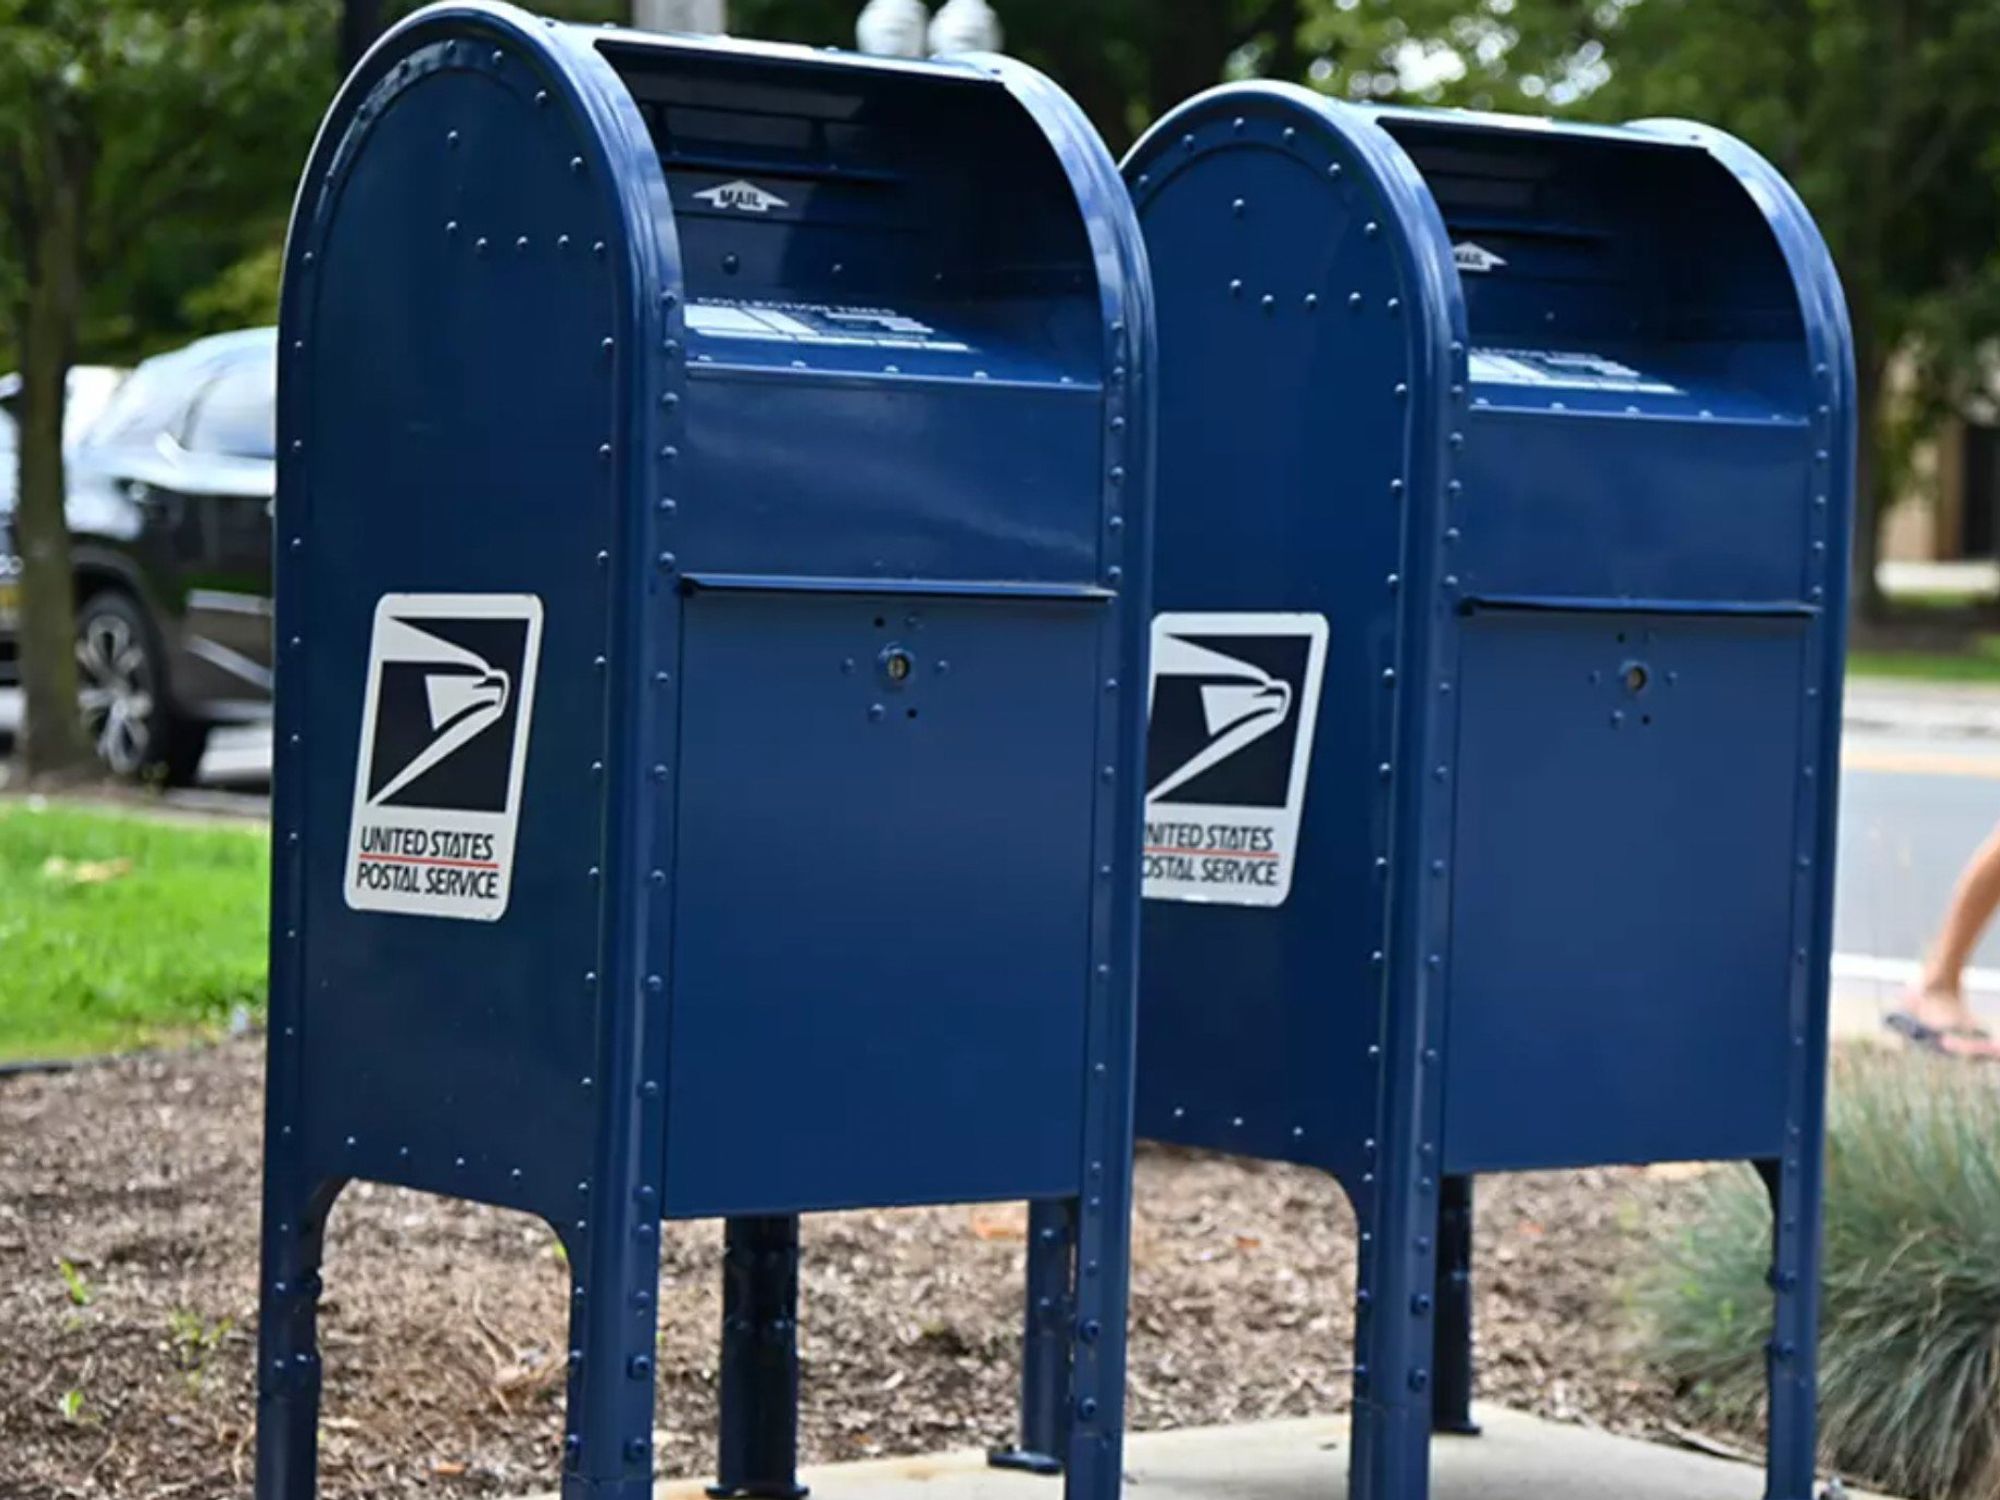 USPS blue mailboxes